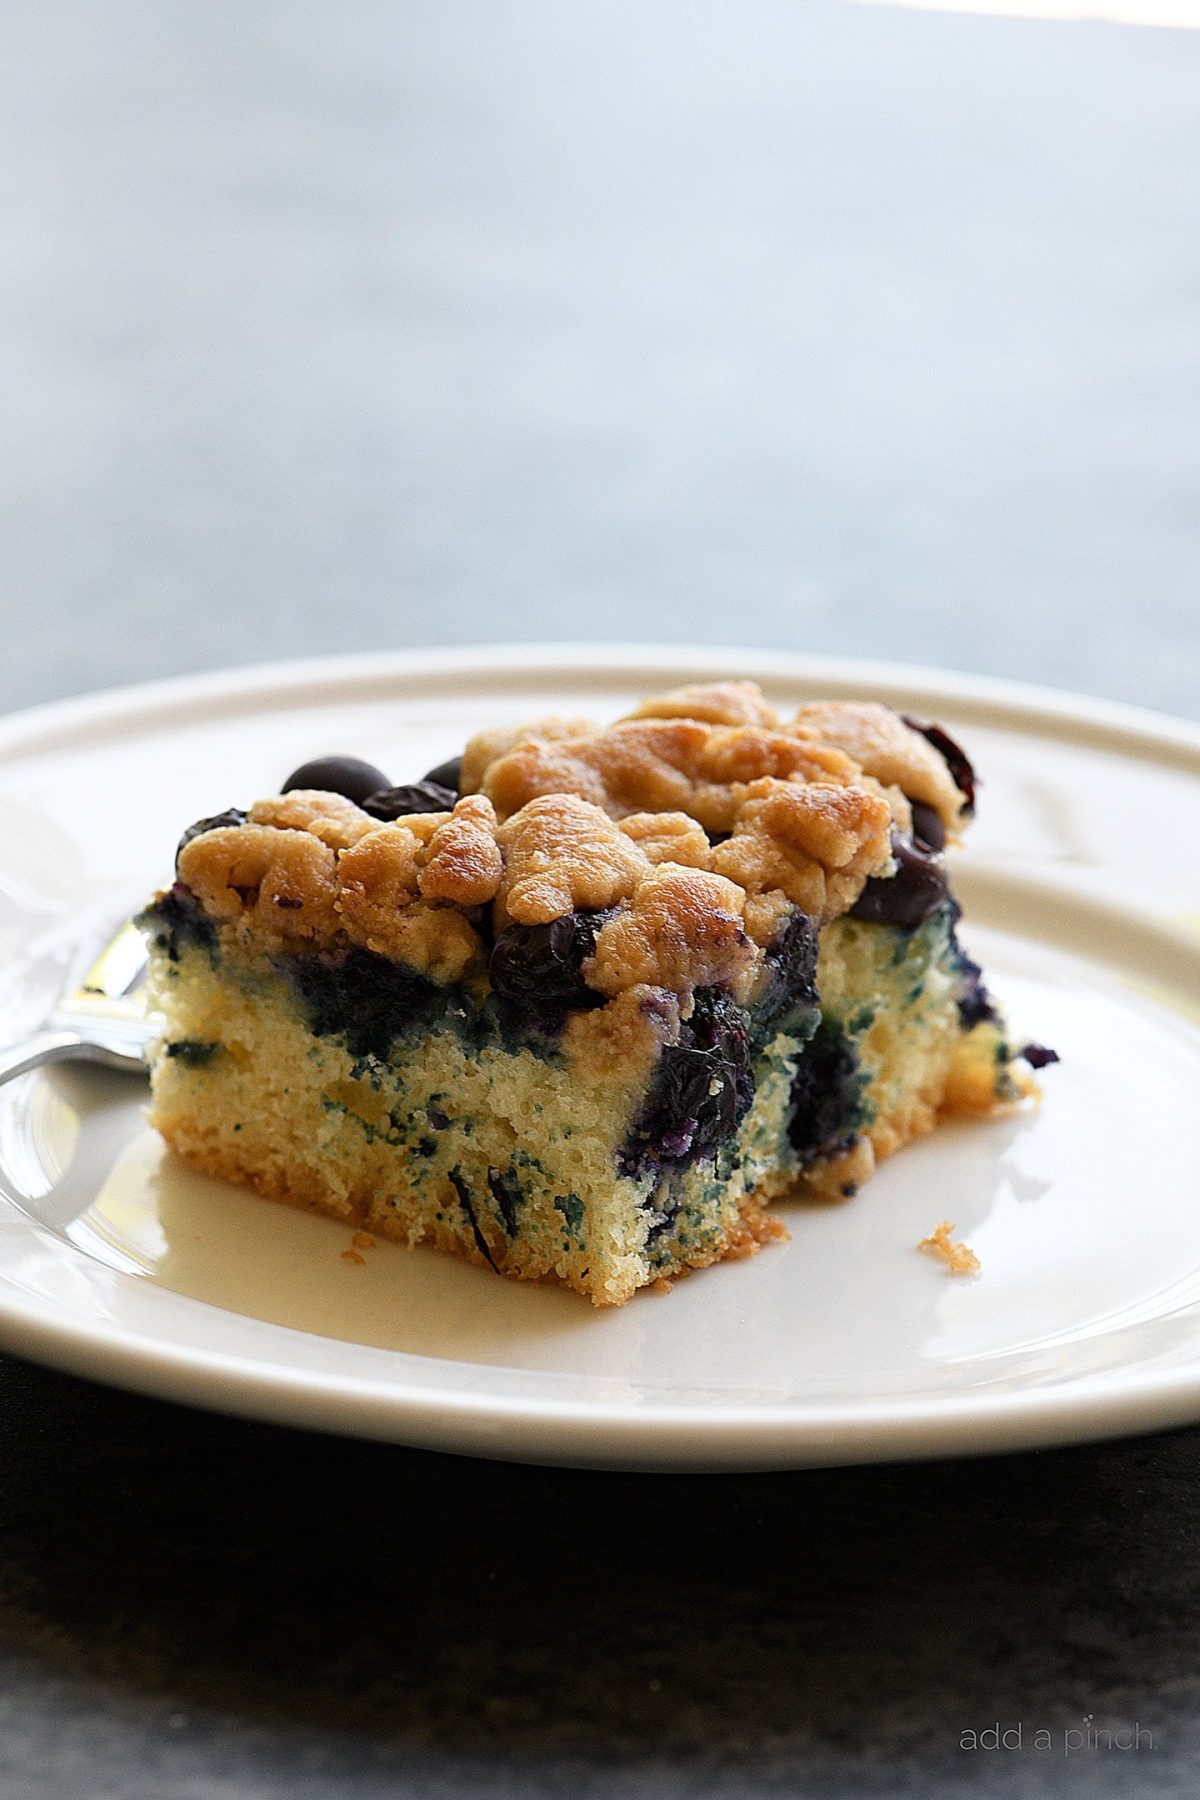 Blueberry Coffee Cake Recipe with Crumb Topping - Add a Pinch